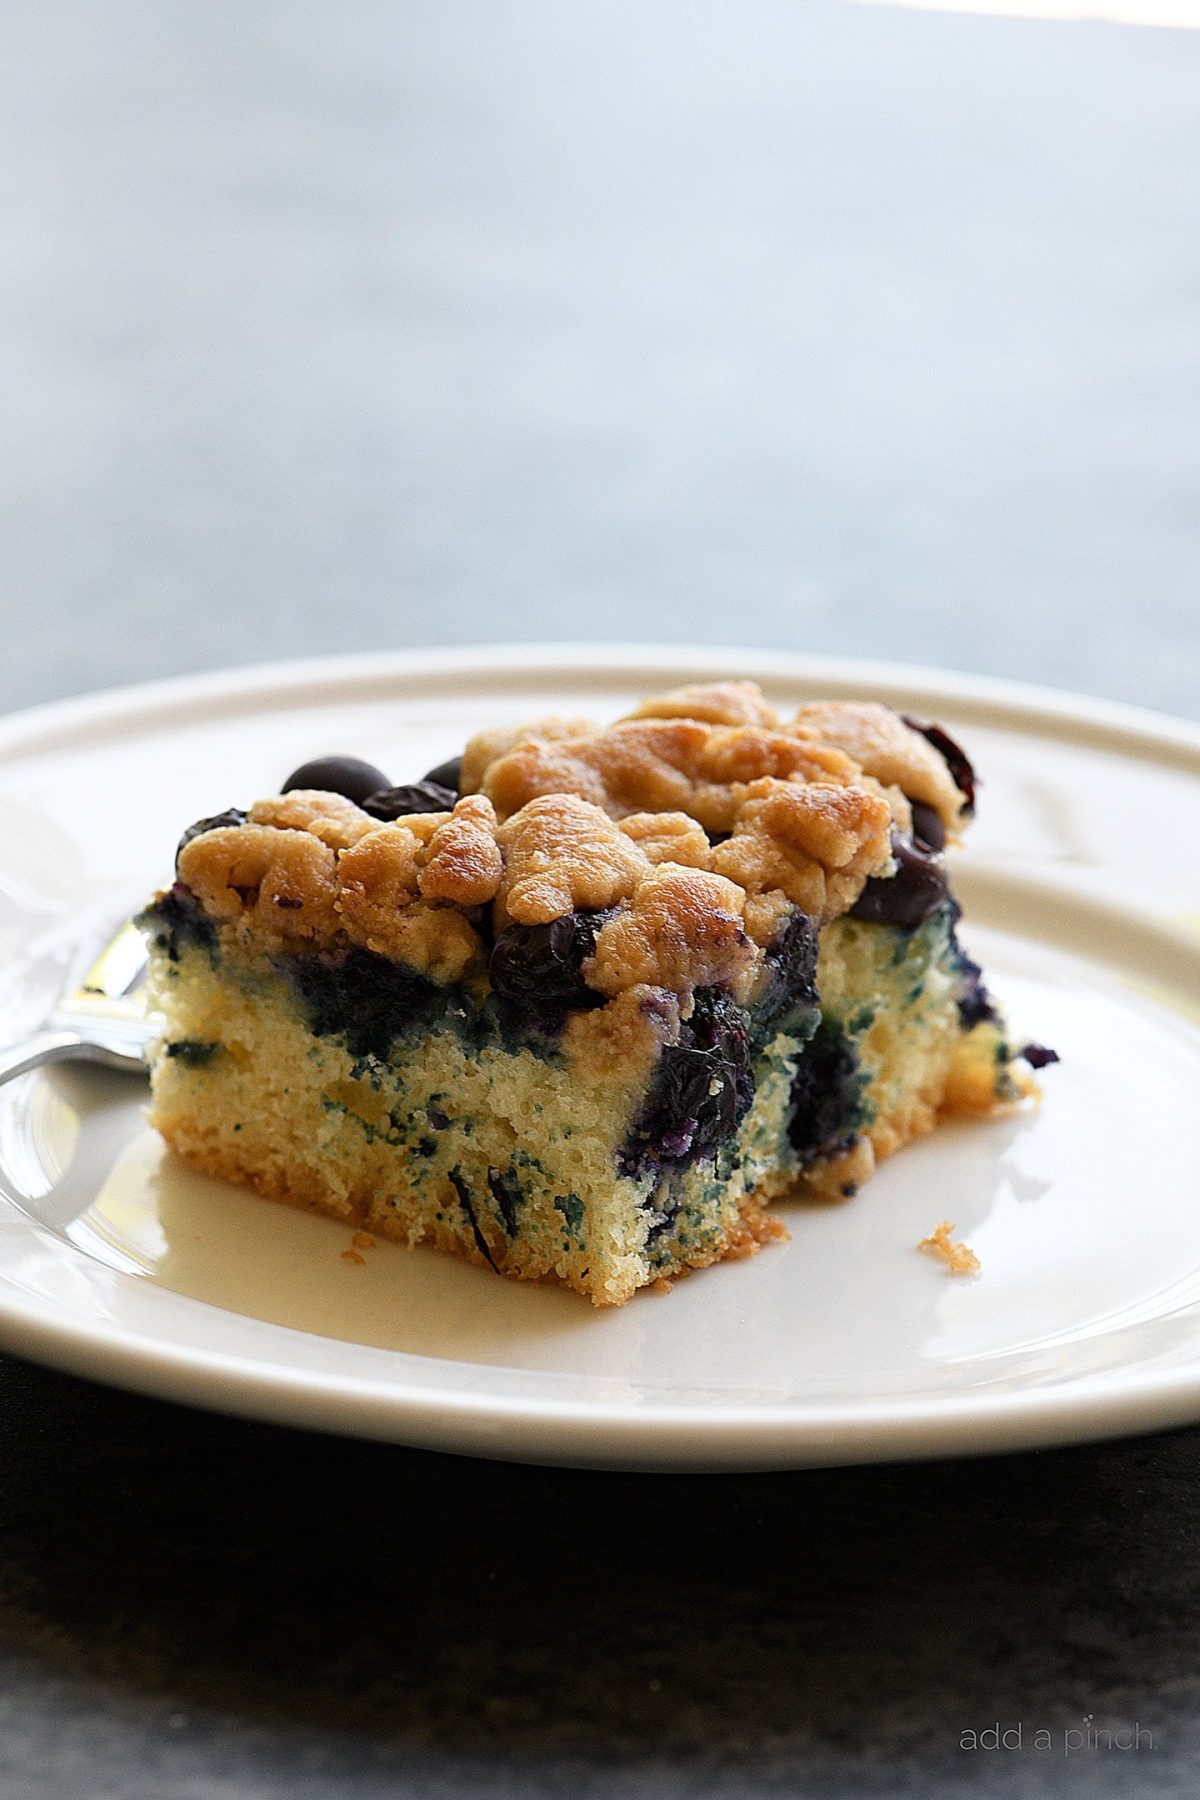 Blueberry Coffee Cake Recipe with Crumb Topping - Add a Pinch